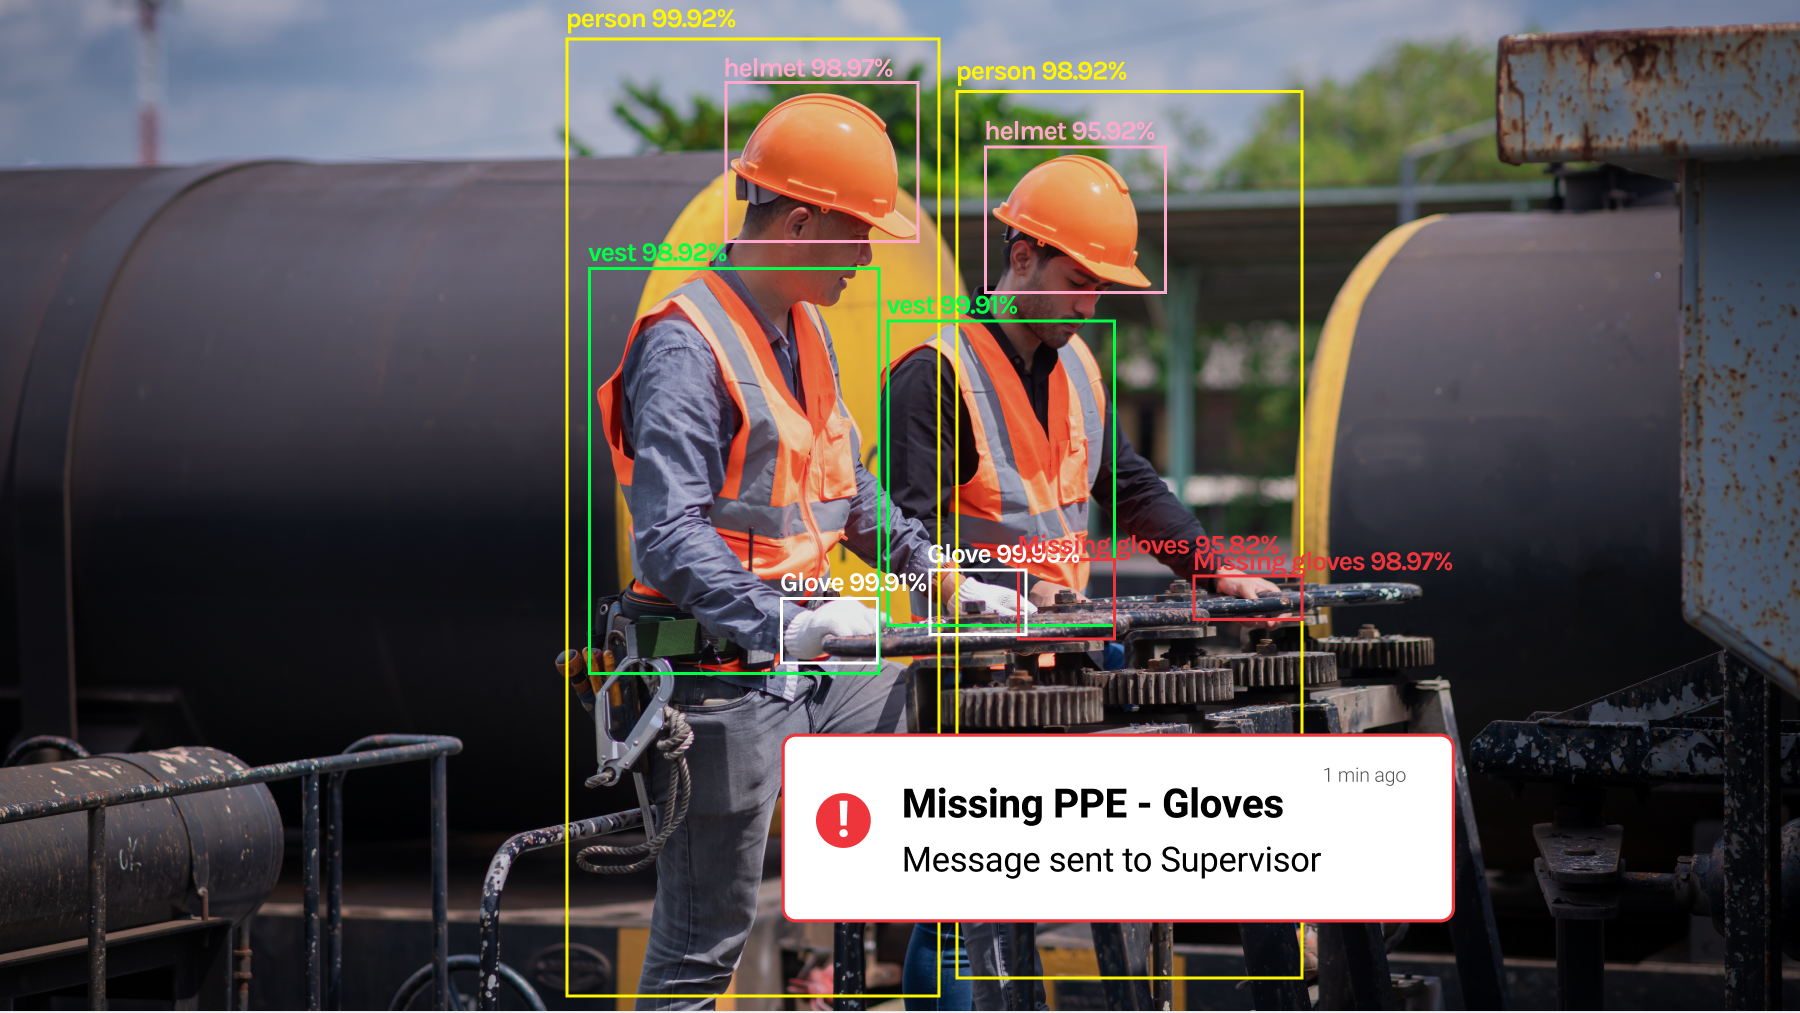 Missing PPE alert detecting a worker is not wearing gloves